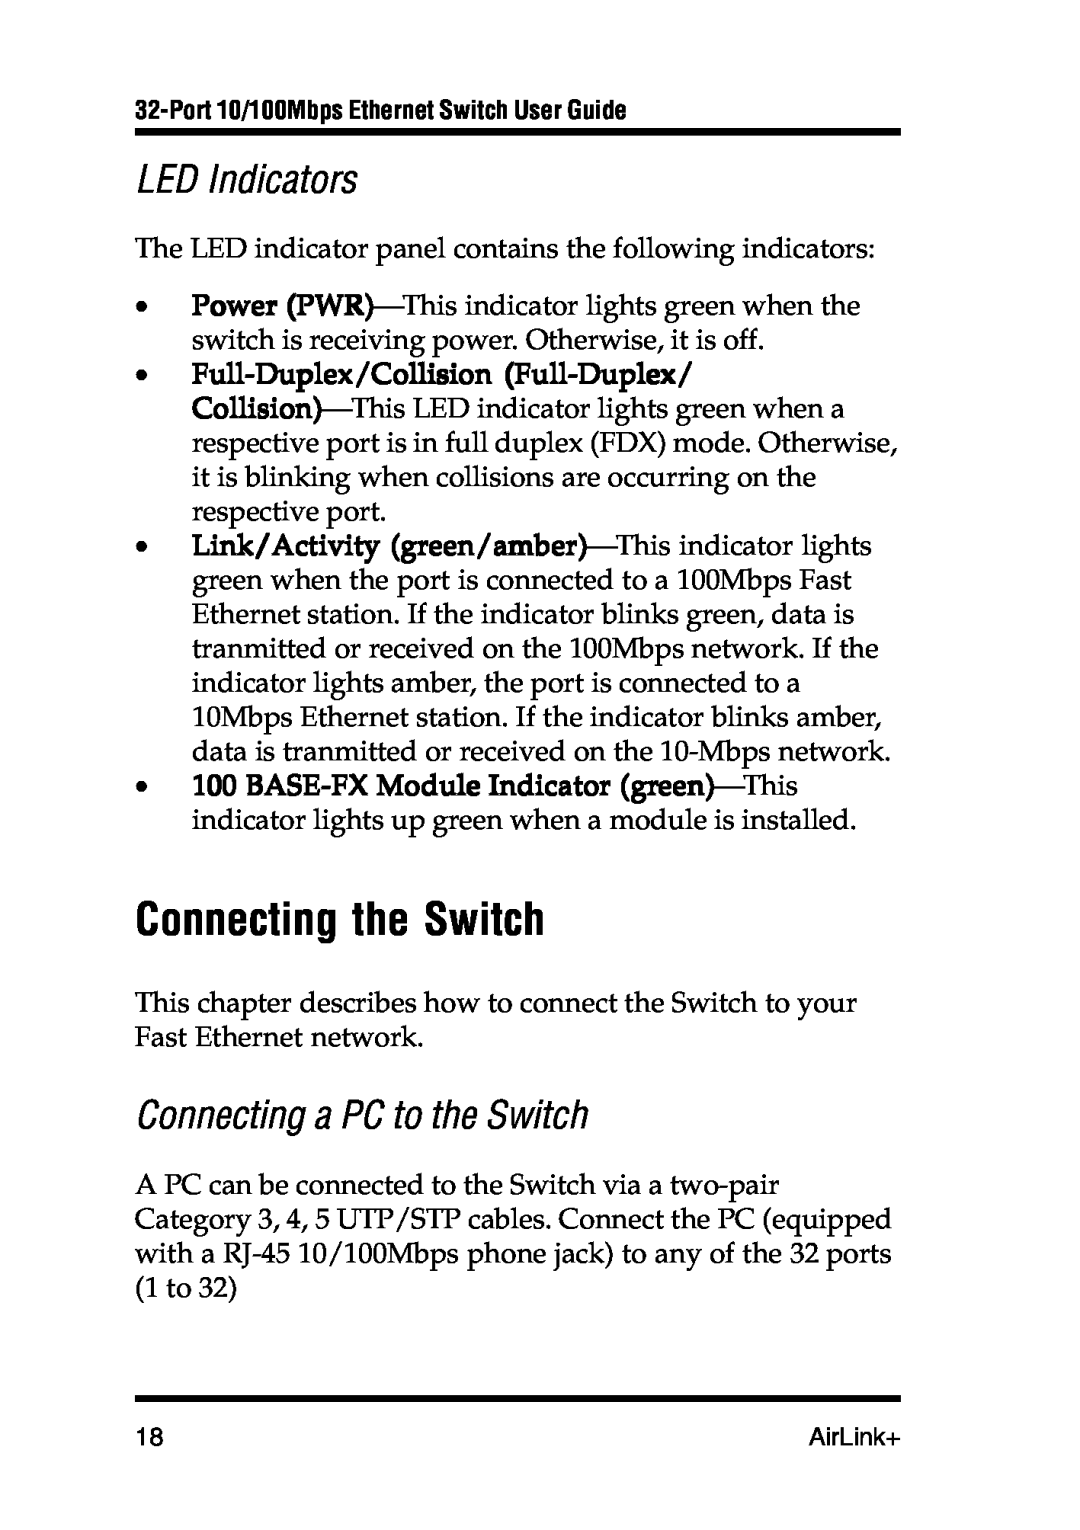 Airlink UG-ASW232-1103 manual Connecting the Switch, LED Indicators, Connecting a PC to the Switch 